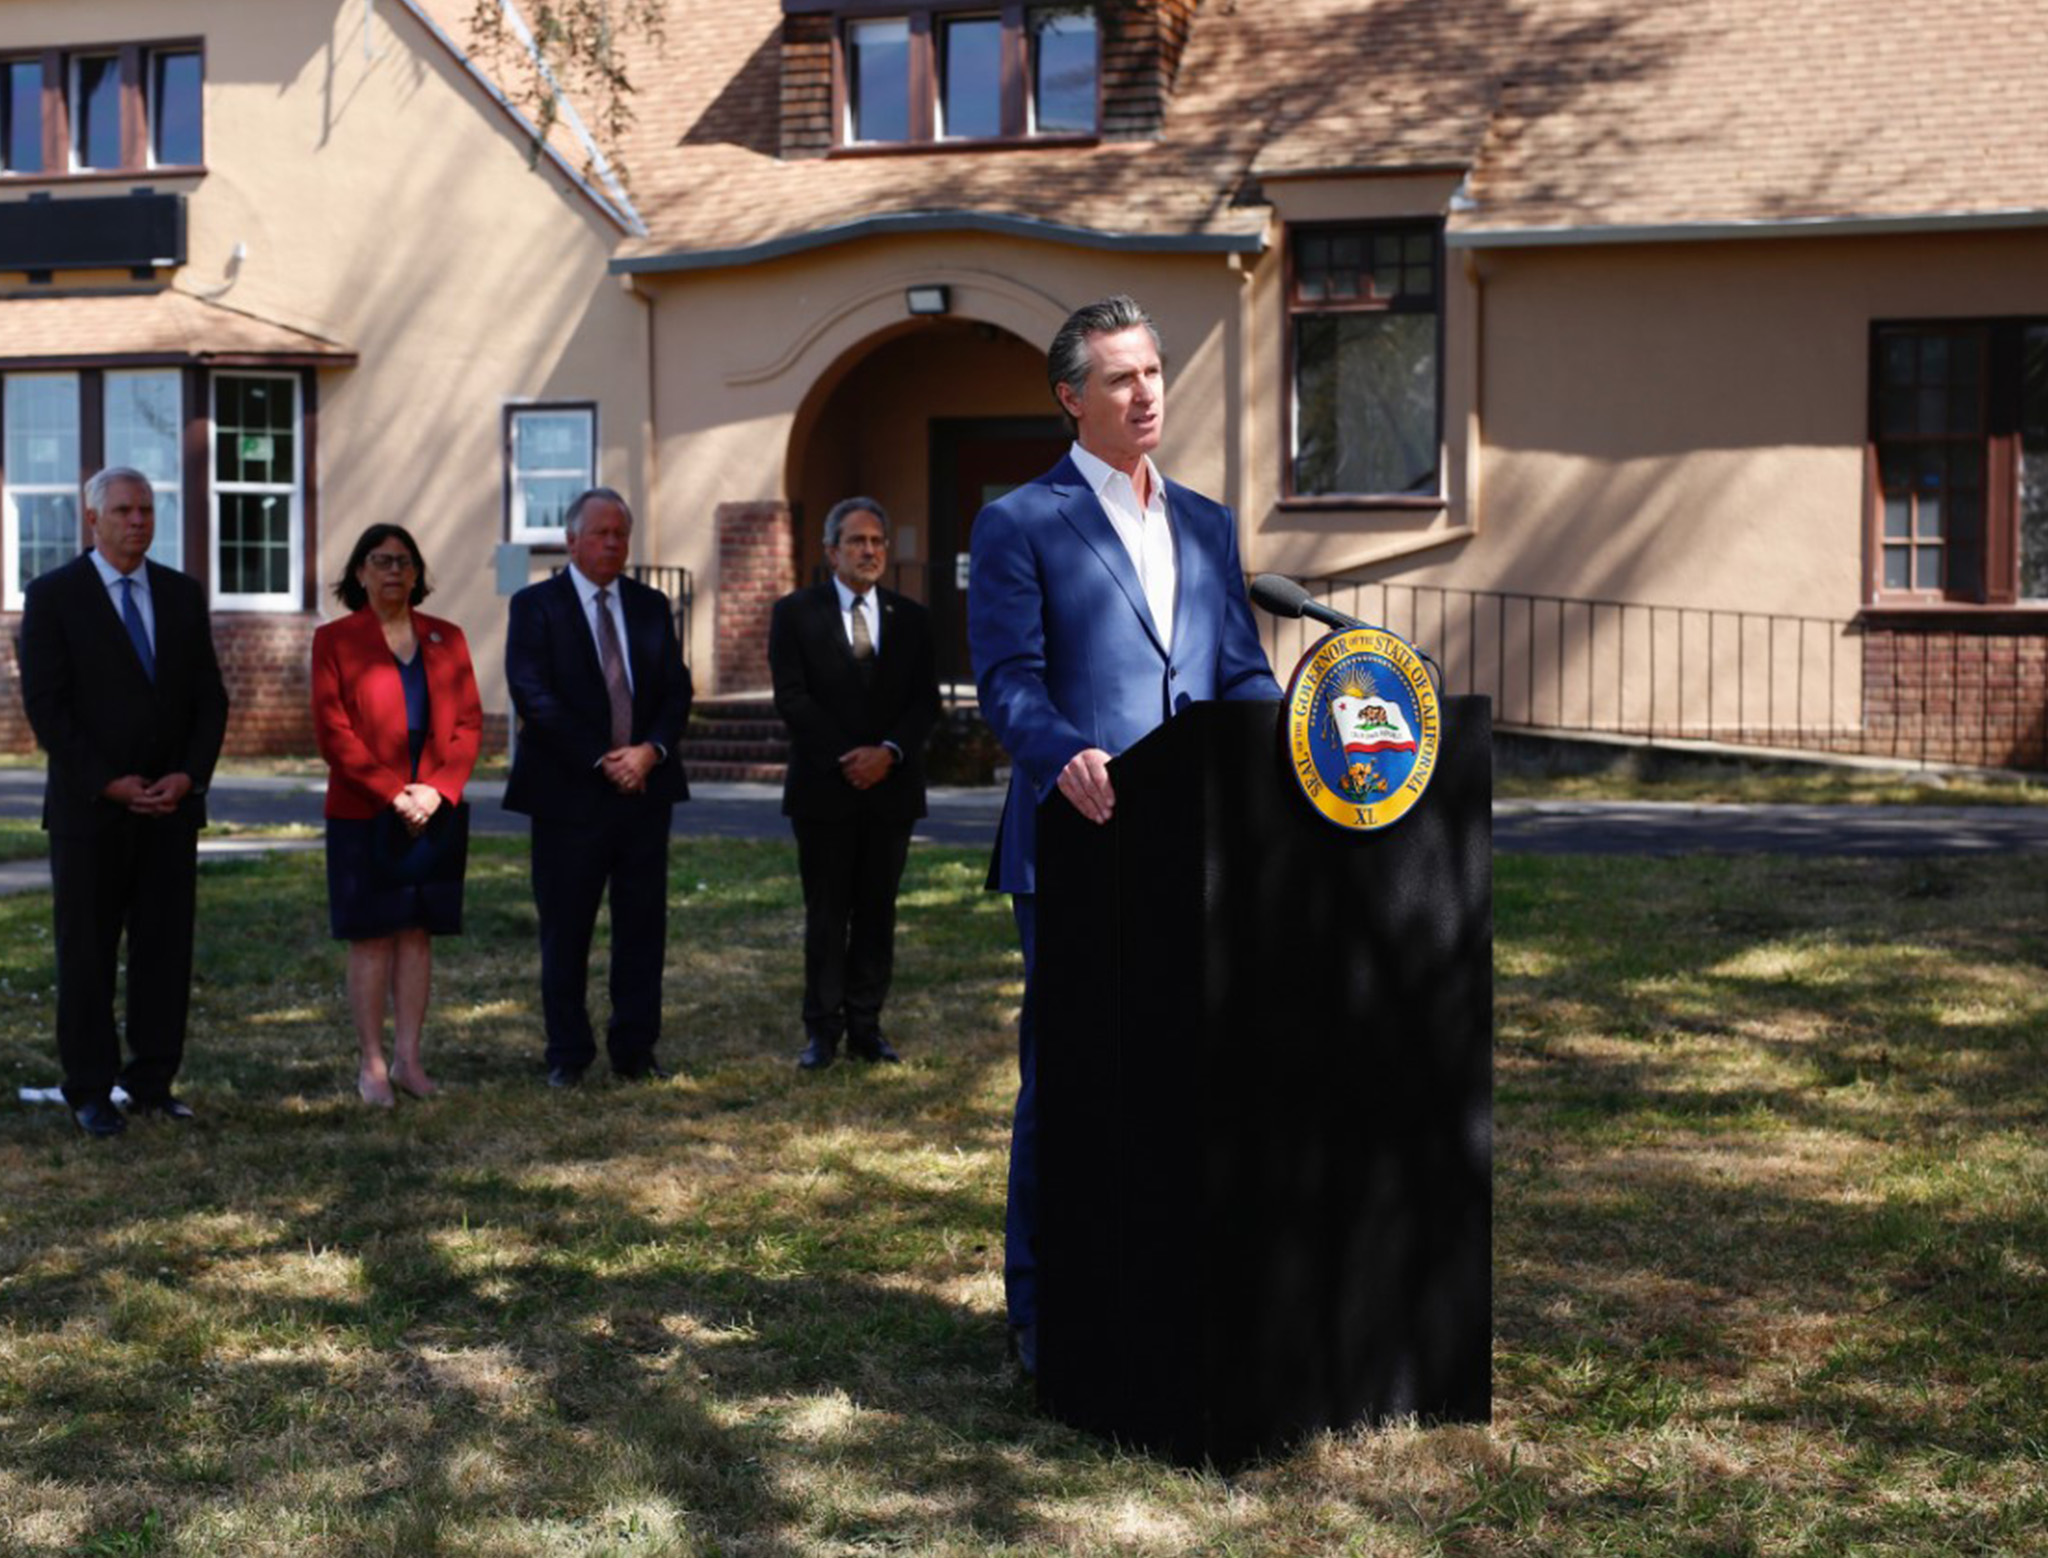 Governor Newsom speaking at a press conference in Napa about the CARE Court proposal following a roundtable with stakeholders.